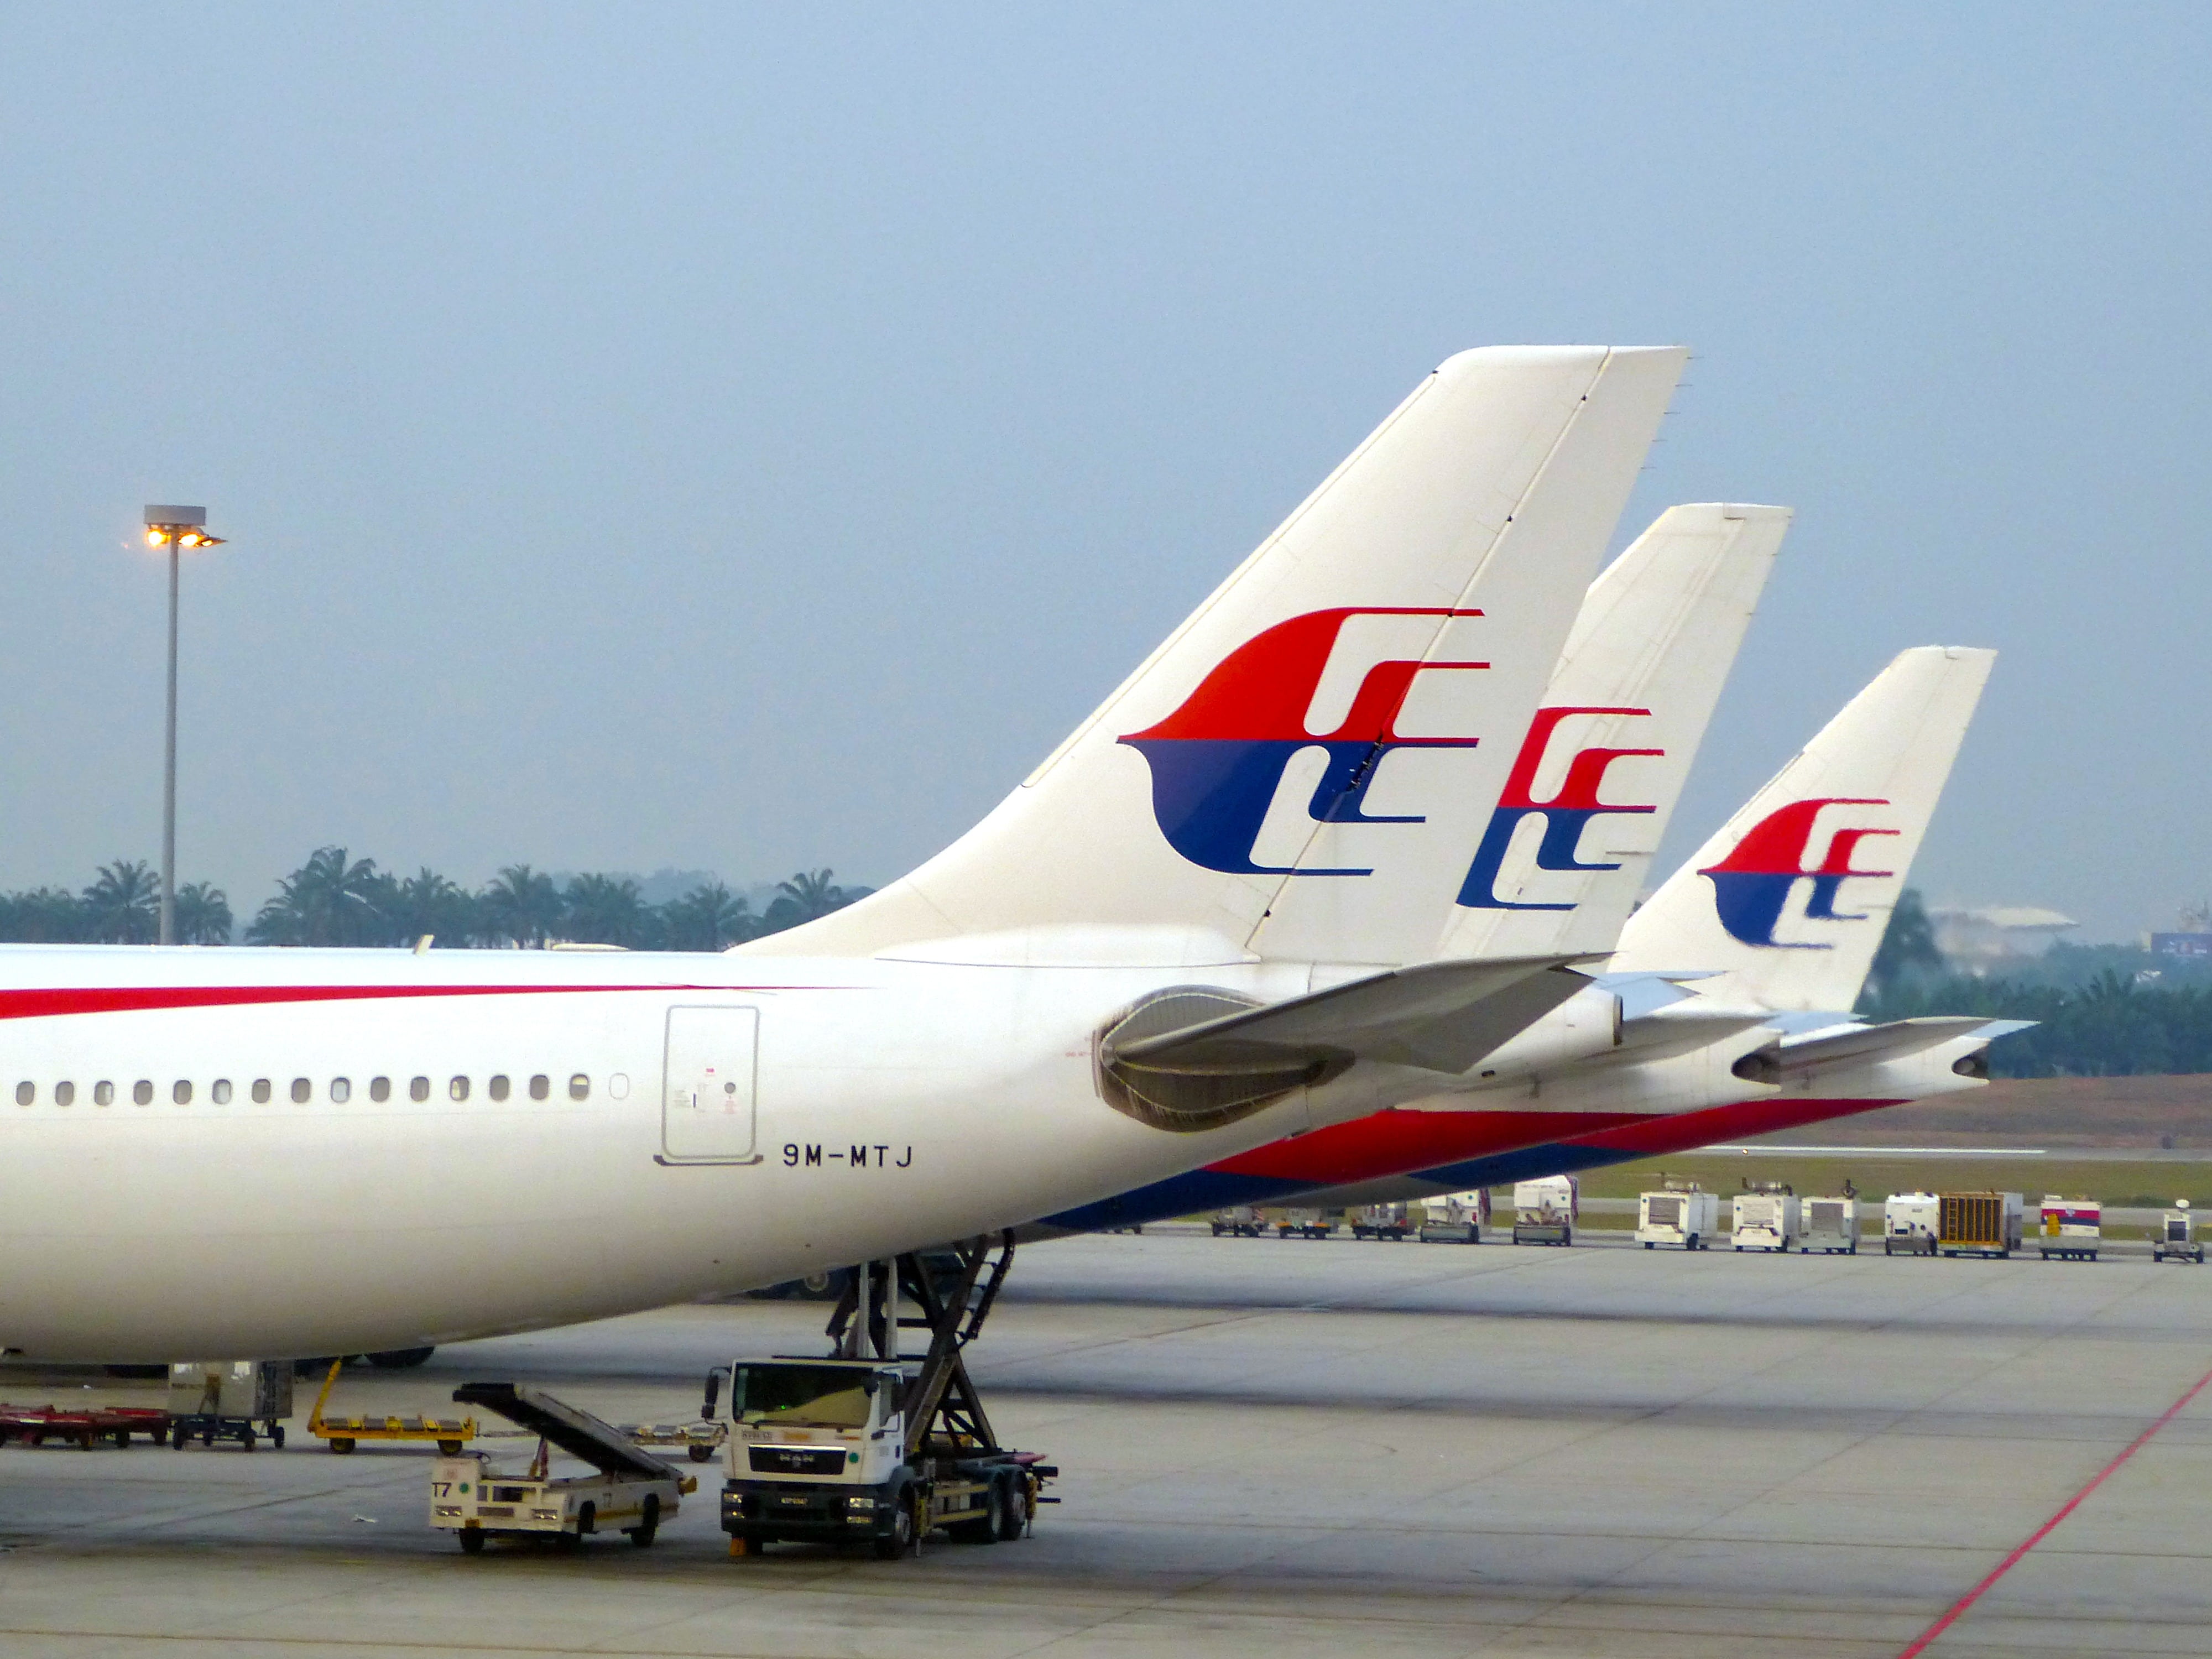 three white-and-red airplanes landing on ground, airline, sky